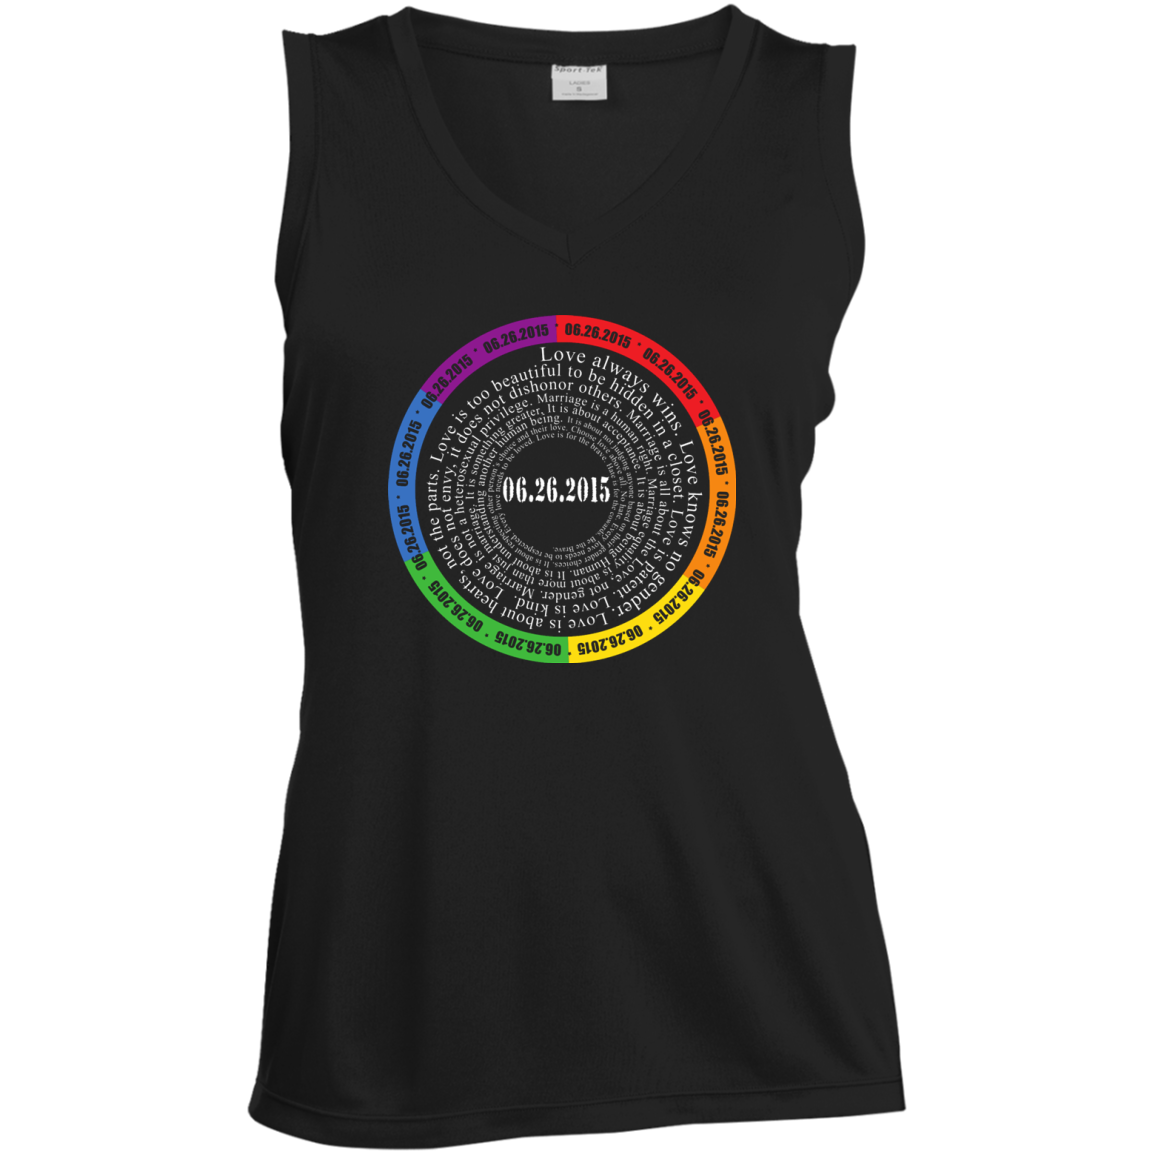 The "Pride Month" Special Shirt LGBT Pride v-neck sleeveless shirt for women